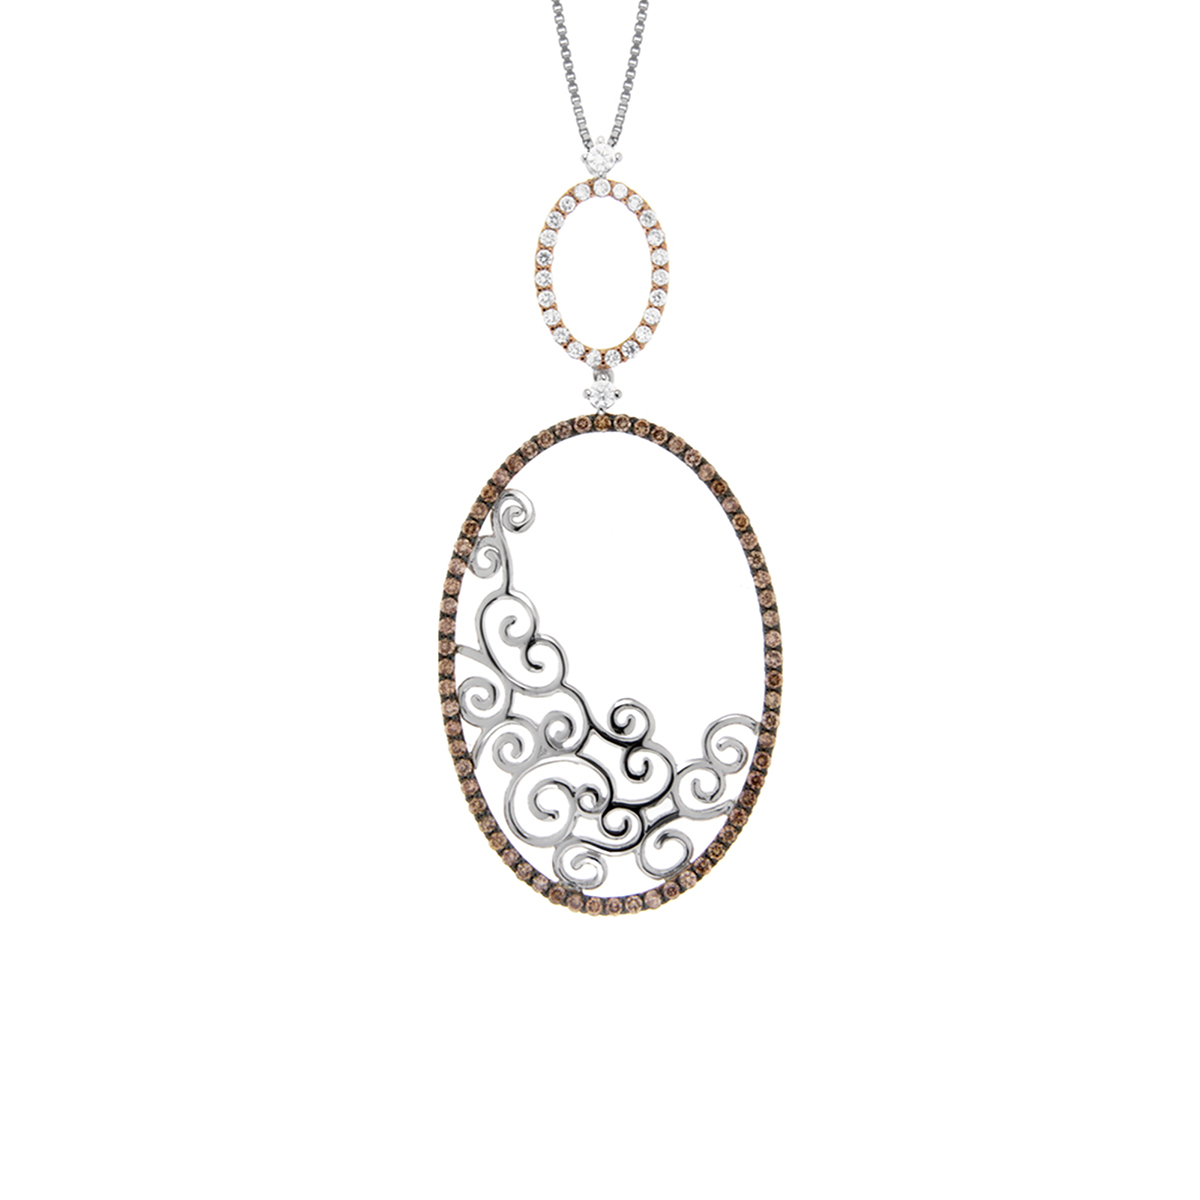 18 K Rose and White Gold Twirl Oval Necklace with White and Brown Diamonds